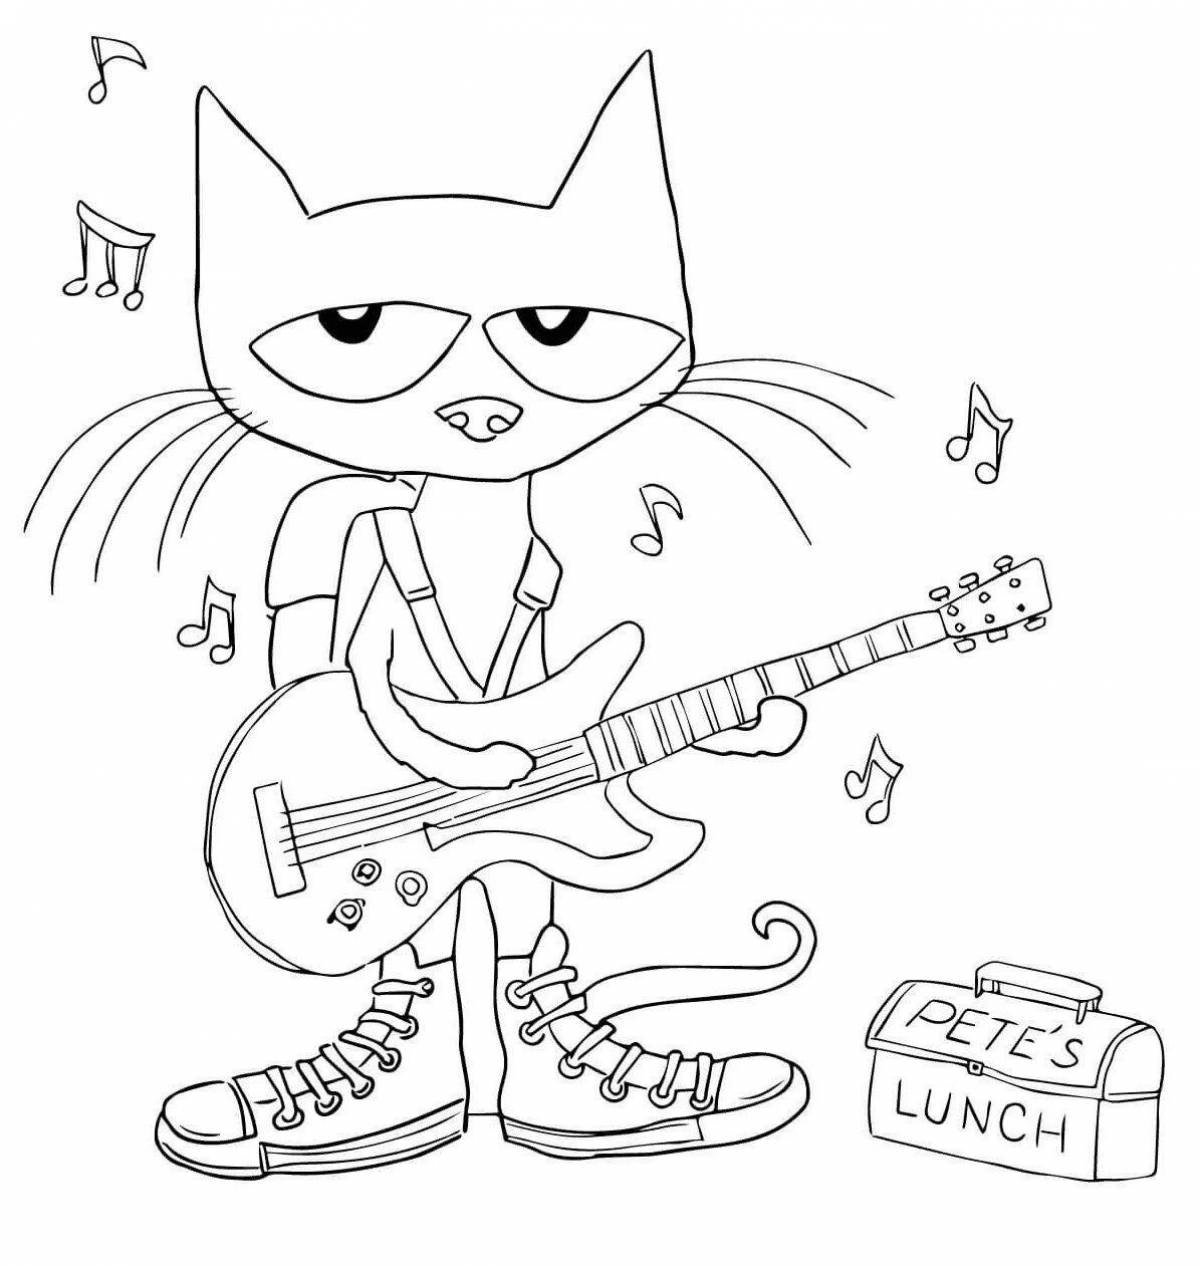 Terrible ginger cat coloring page